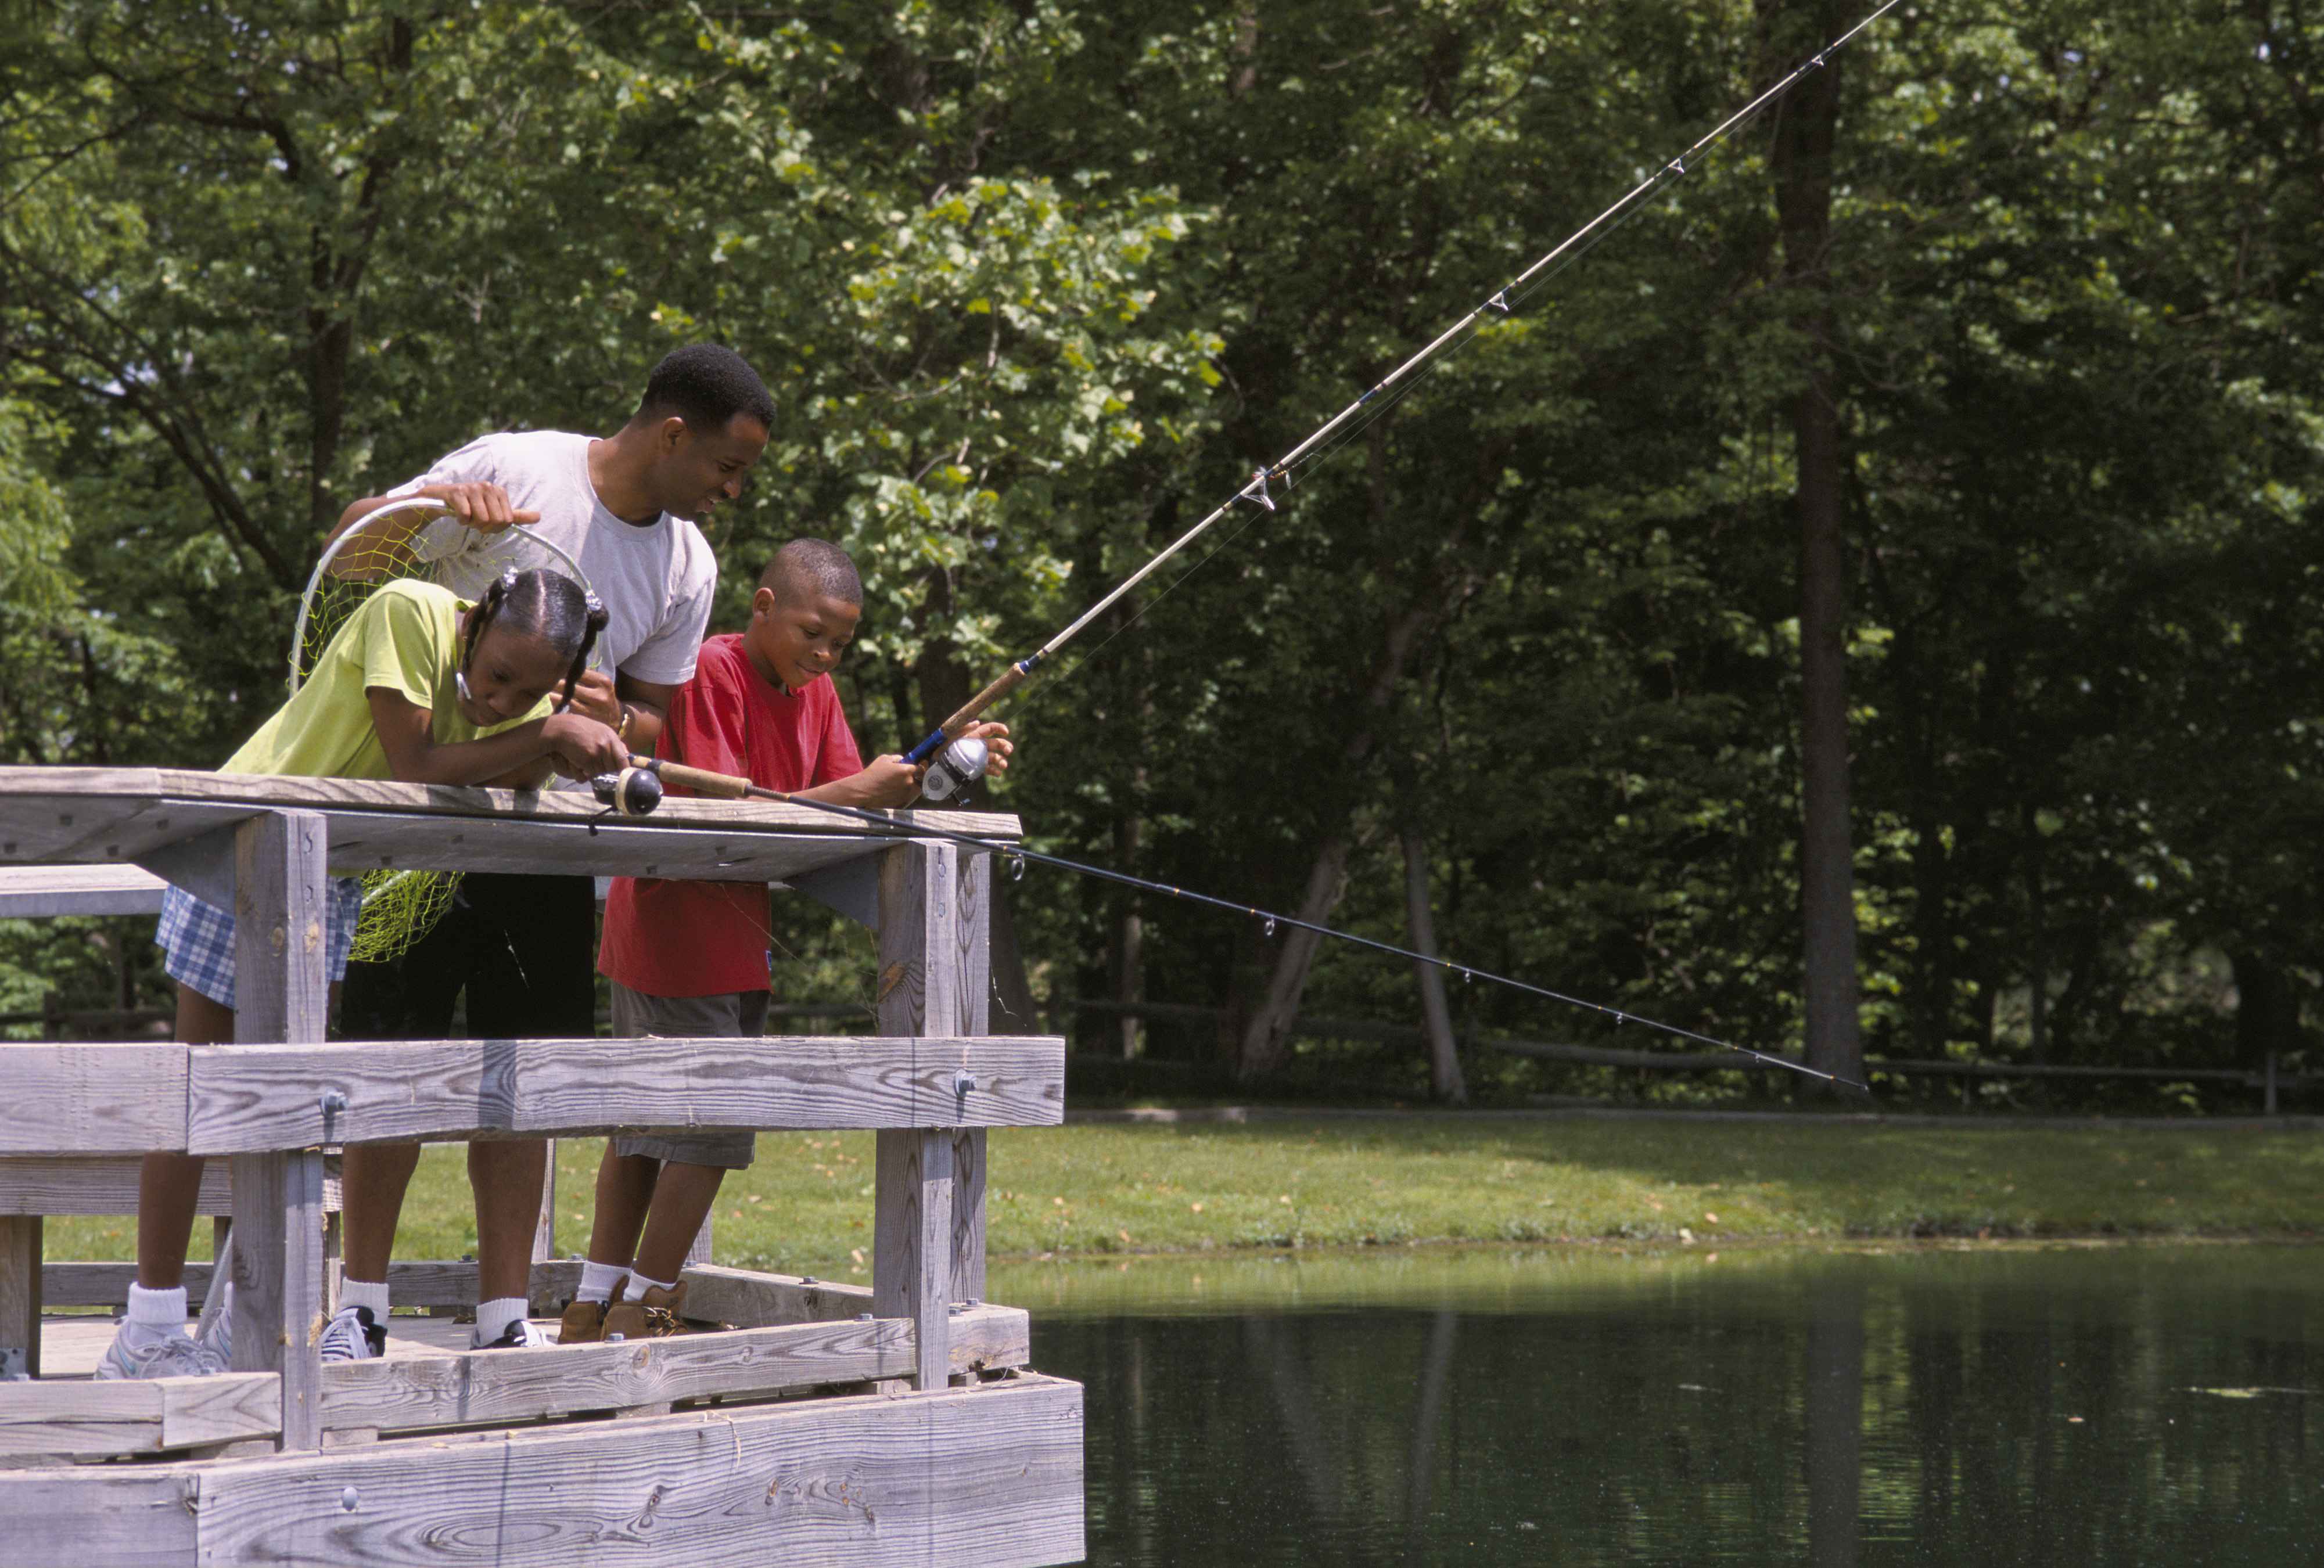 File:Family fishing from a bridge at a local pond.jpg - Wikimedia